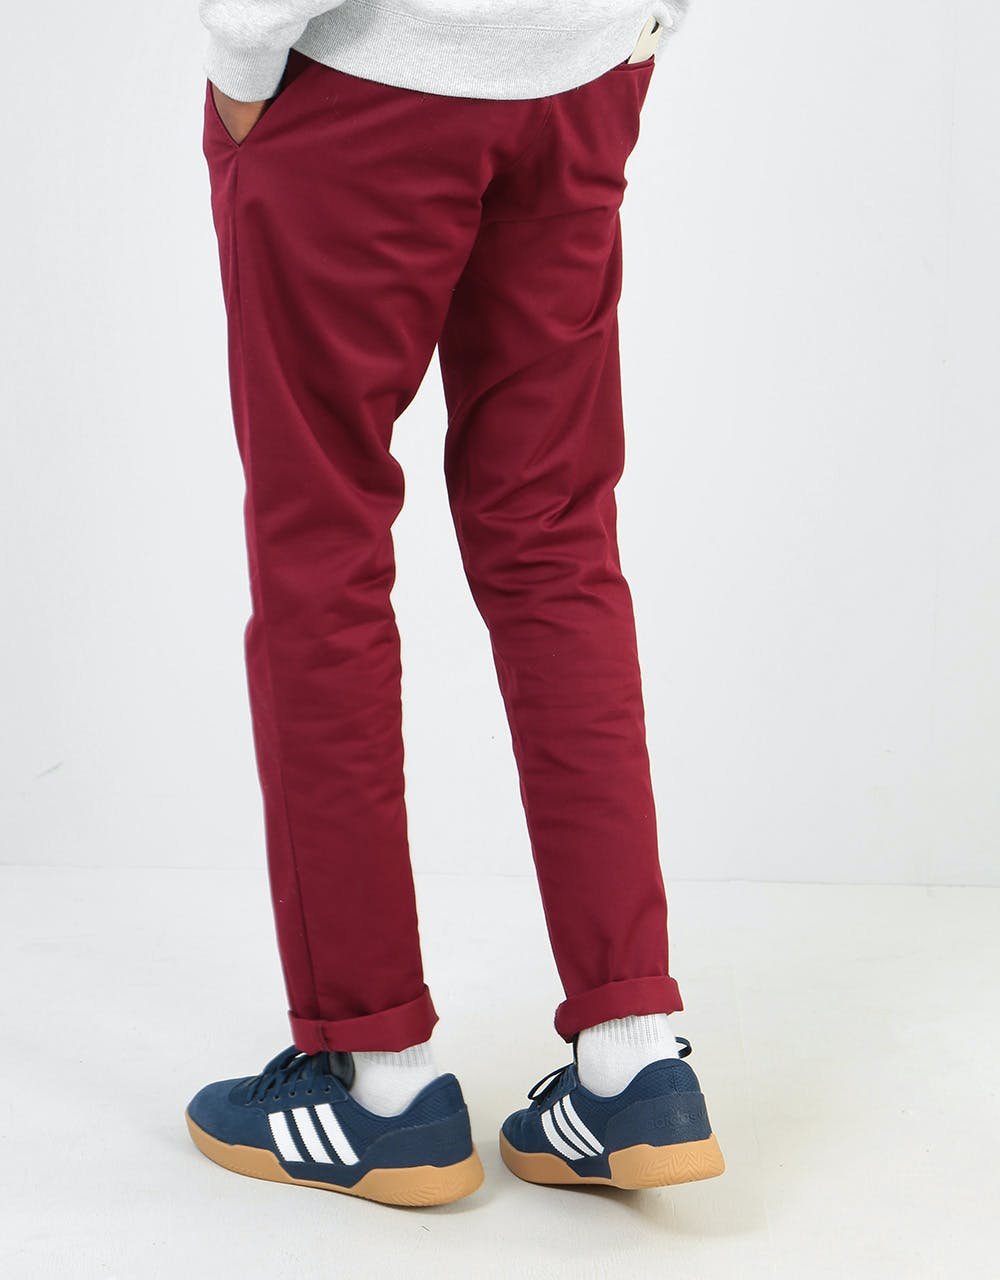 Carhartt WIP Sid Pant - Cranberry (Rinsed)